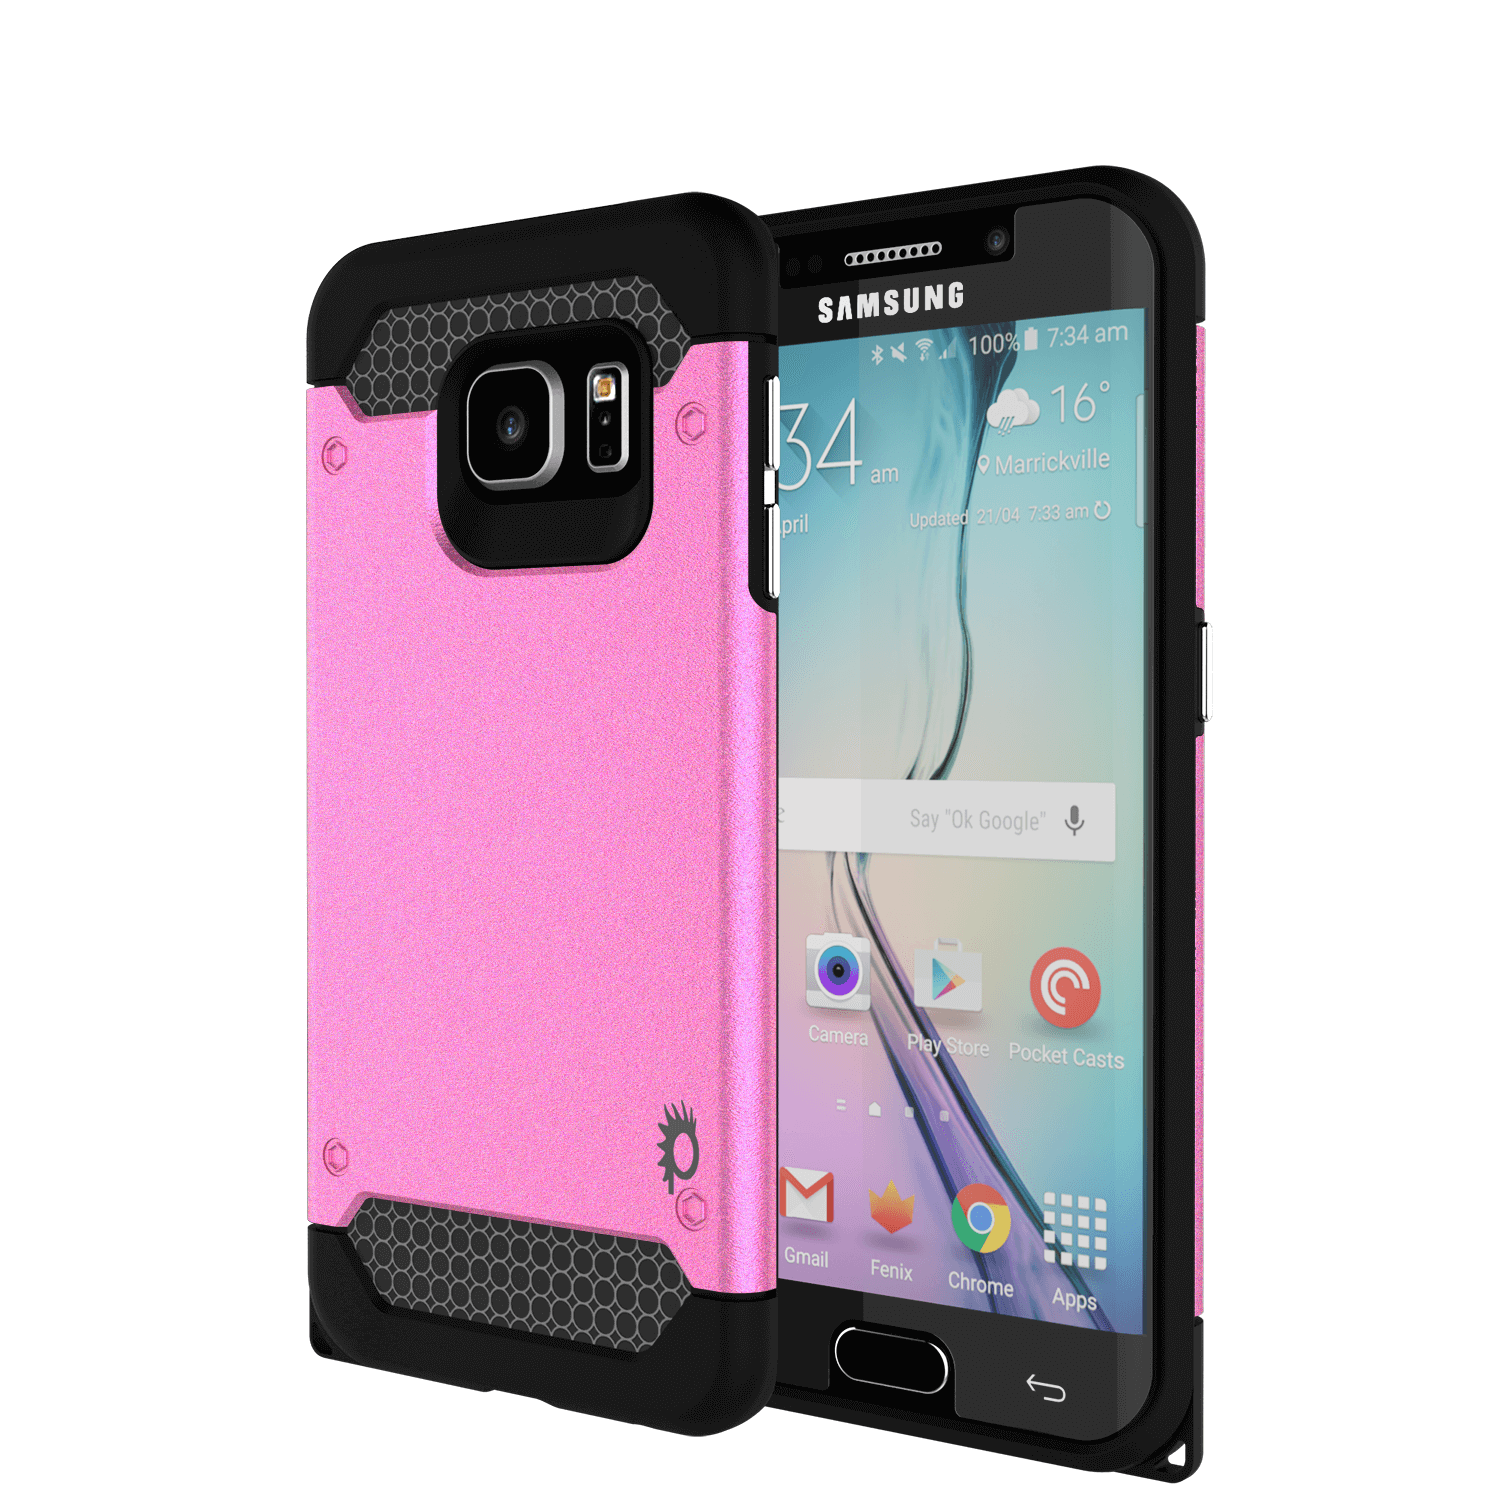 Galaxy s6 EDGE Case PunkCase Galactic Pink Series Slim Protective Armor Soft Cover Case w/ Tempered Glass Protector Lifetime Warranty